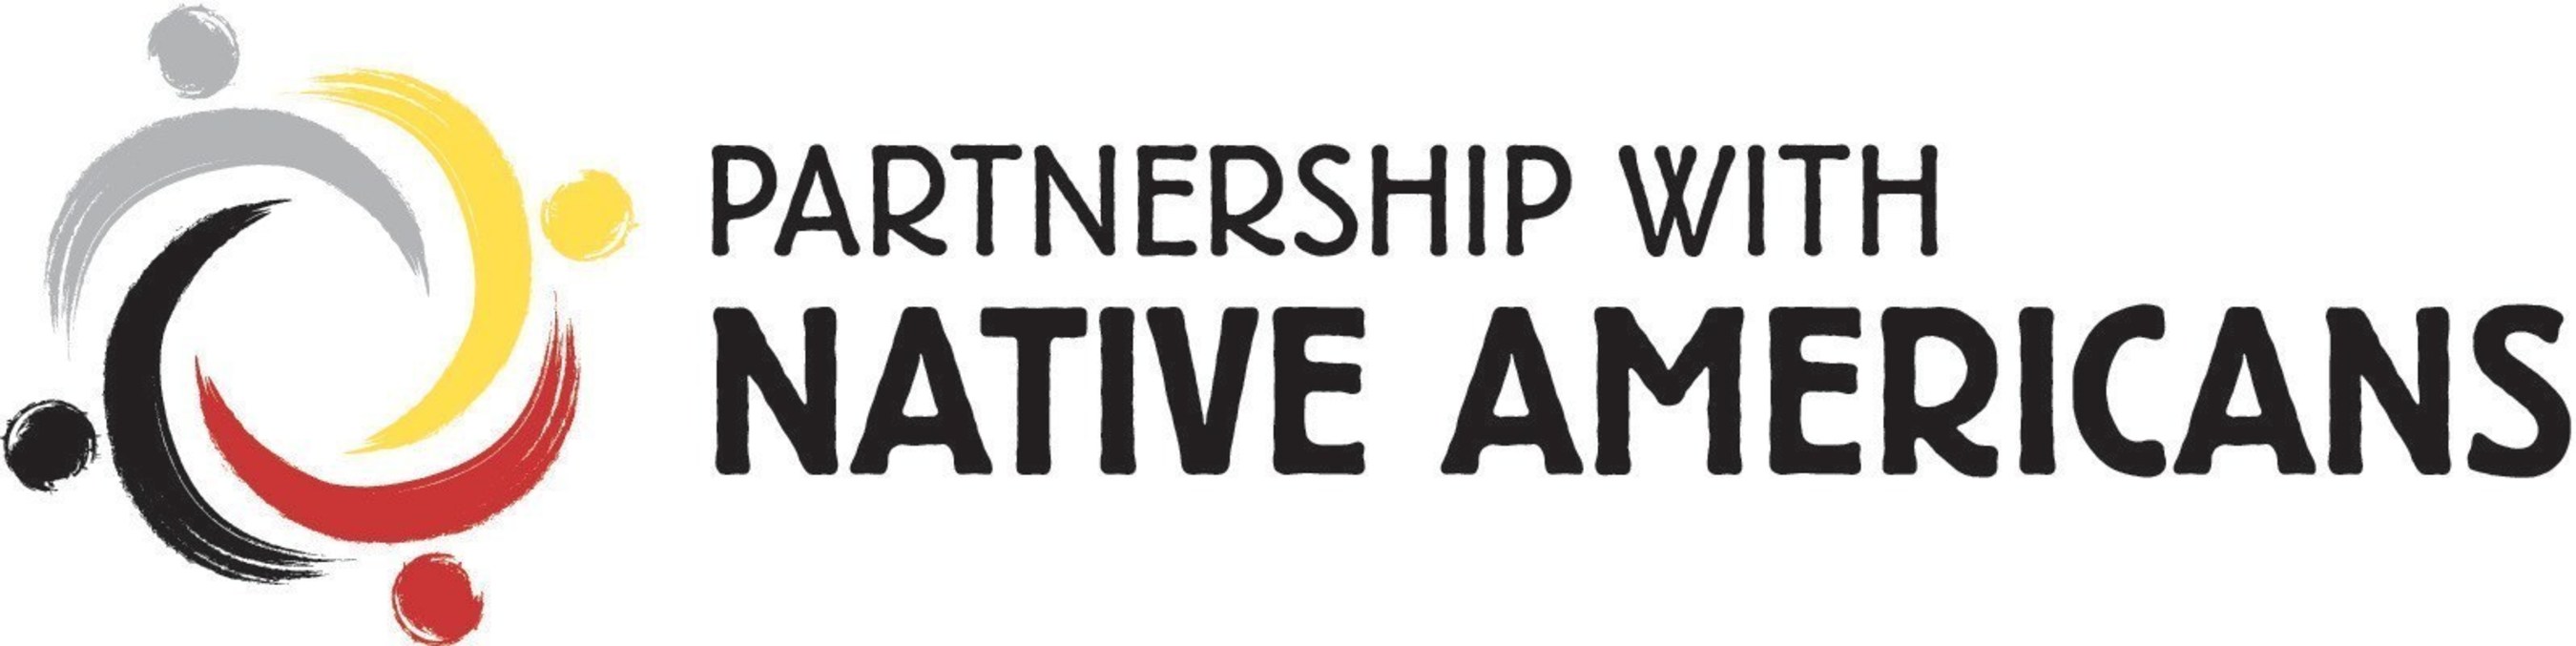 Partnership With Native Americans, a 501c3 nonprofit organization, provides consistent aid and services for Native Americans with the highest needs in the U.S.